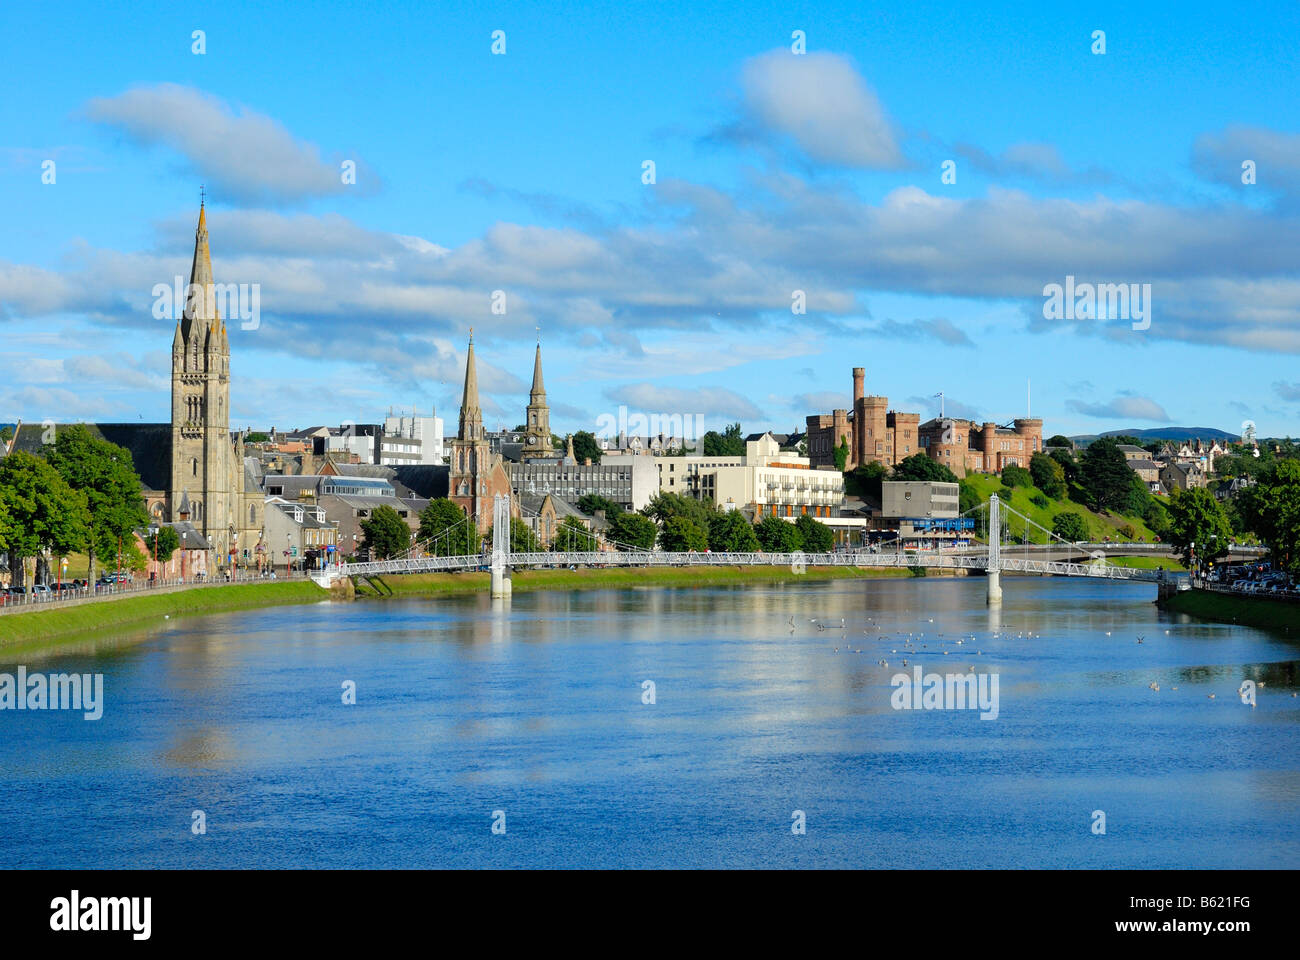 View of the historic city centre of Inverness, Scotland, Great Britain, Europe Stock Photo